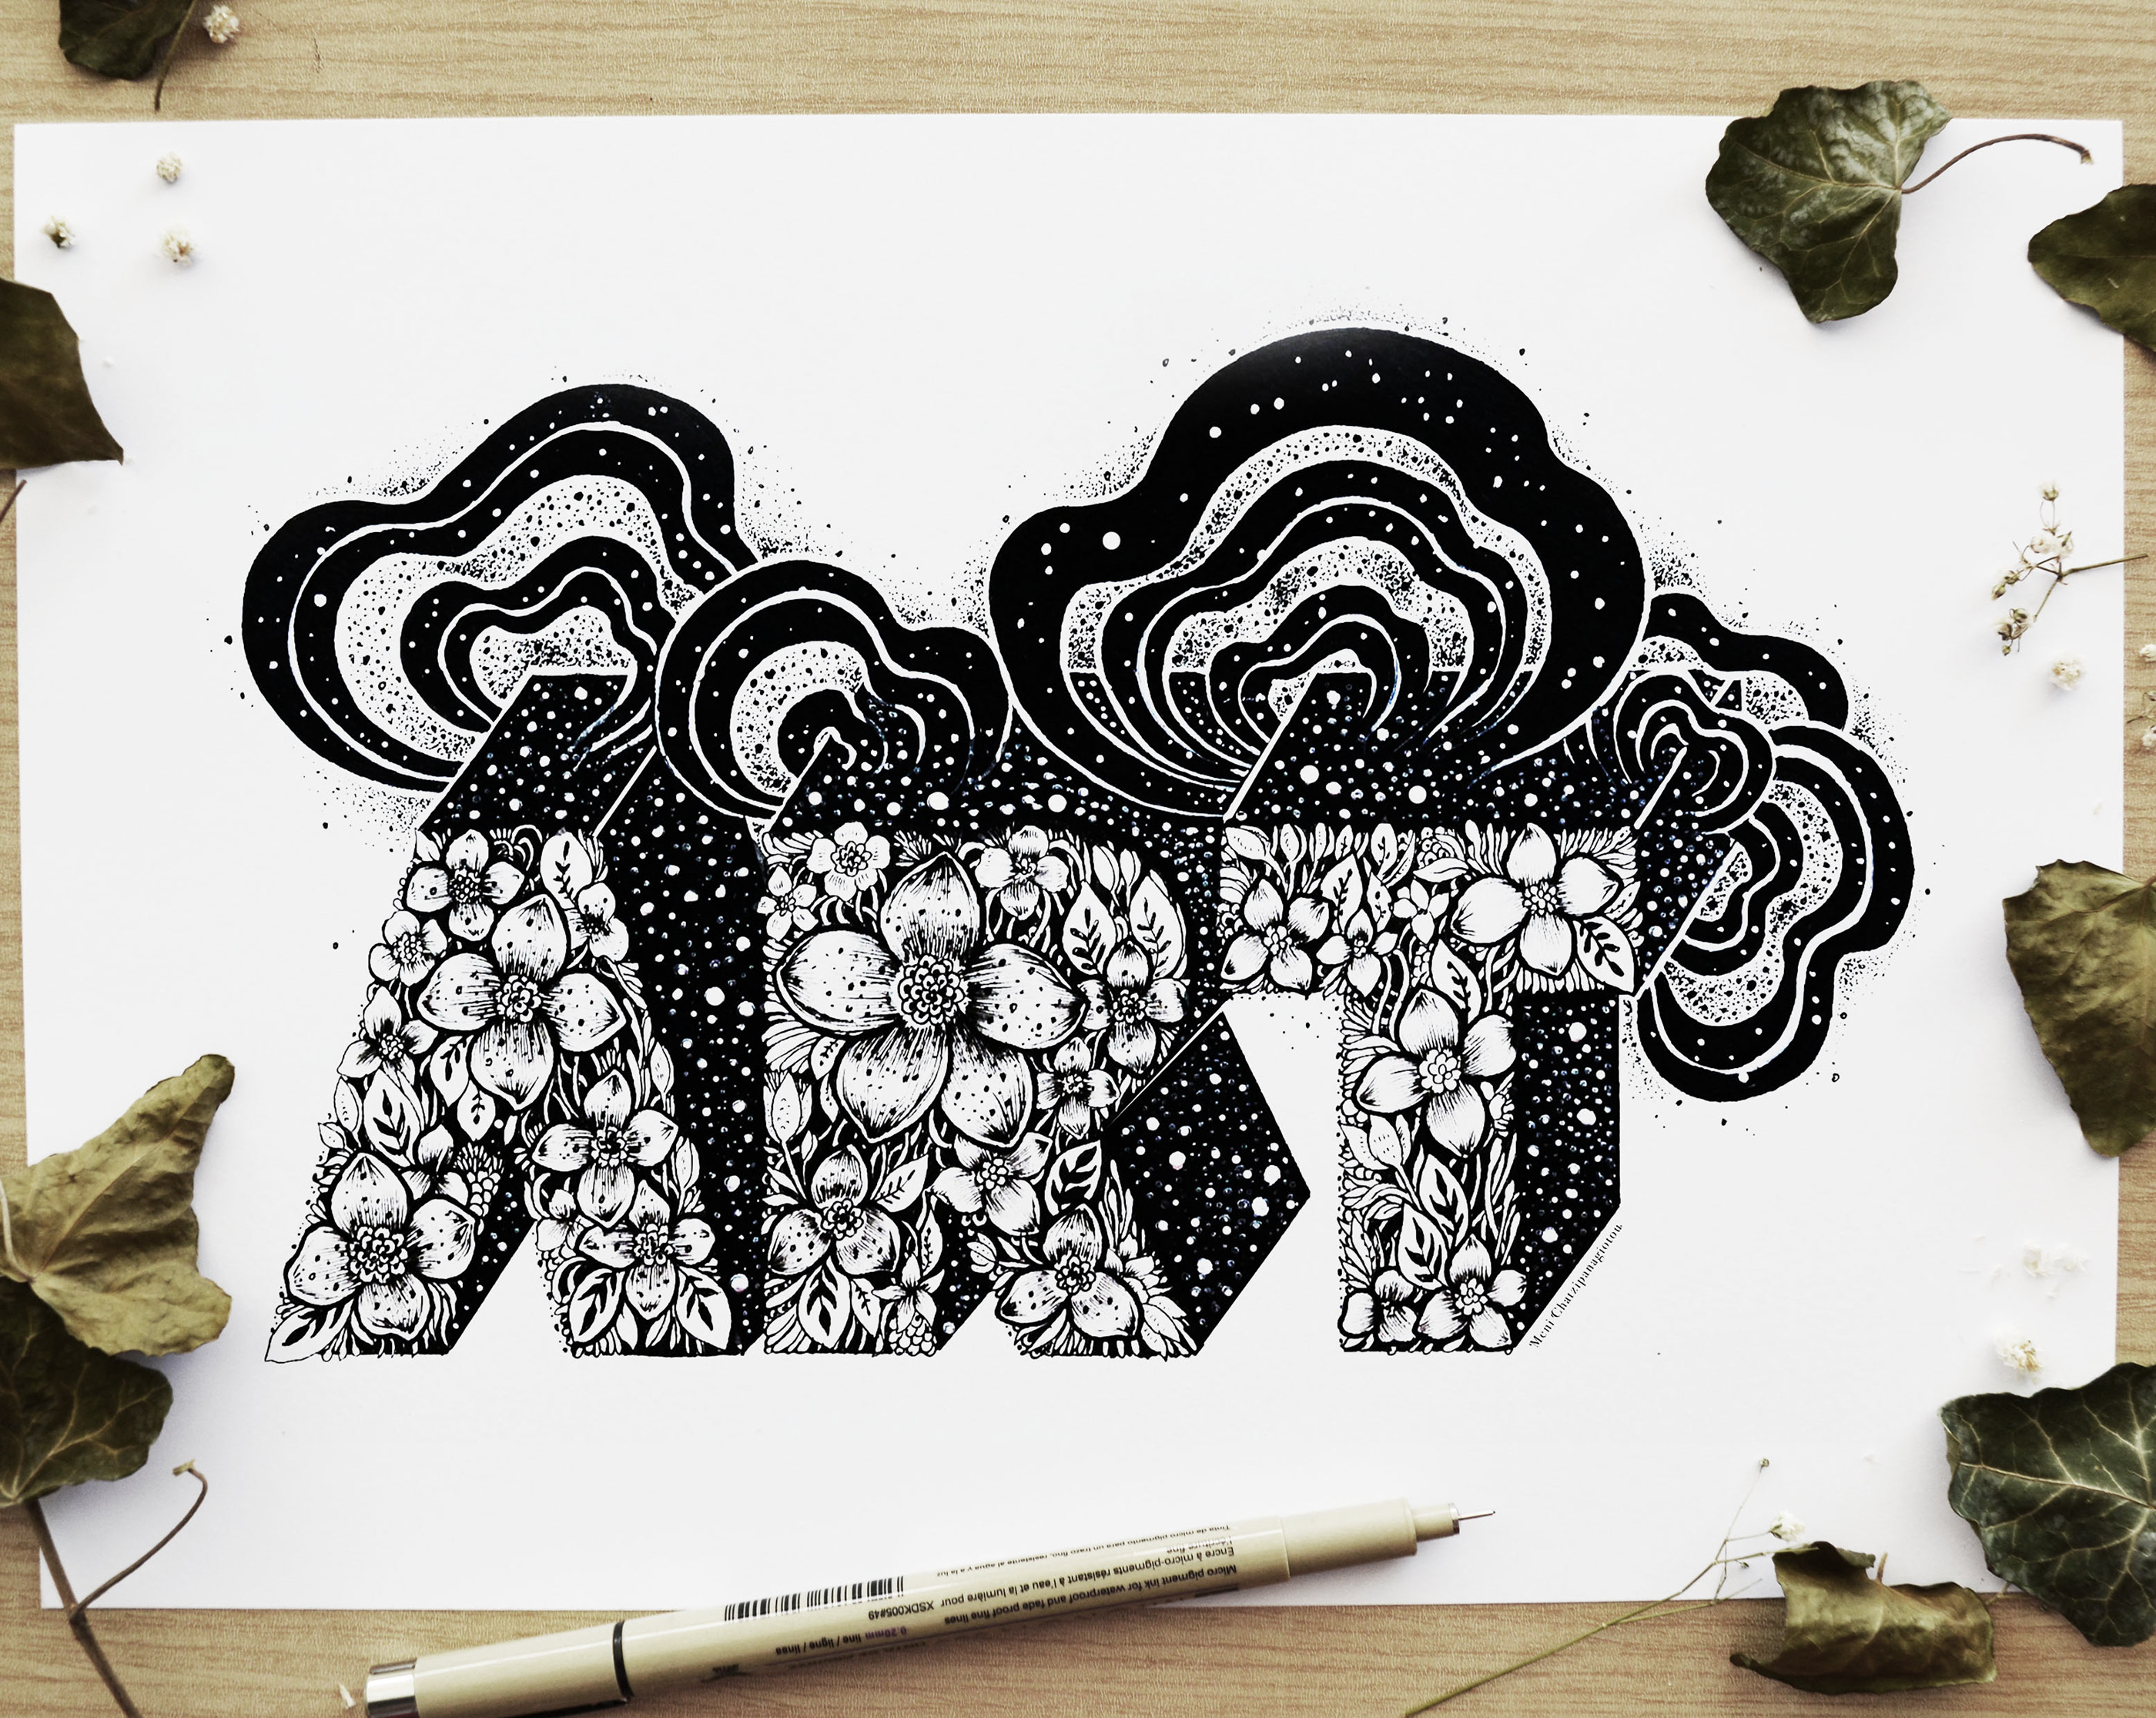 Lettering Illustrations by Meni Chatzipanagiotou